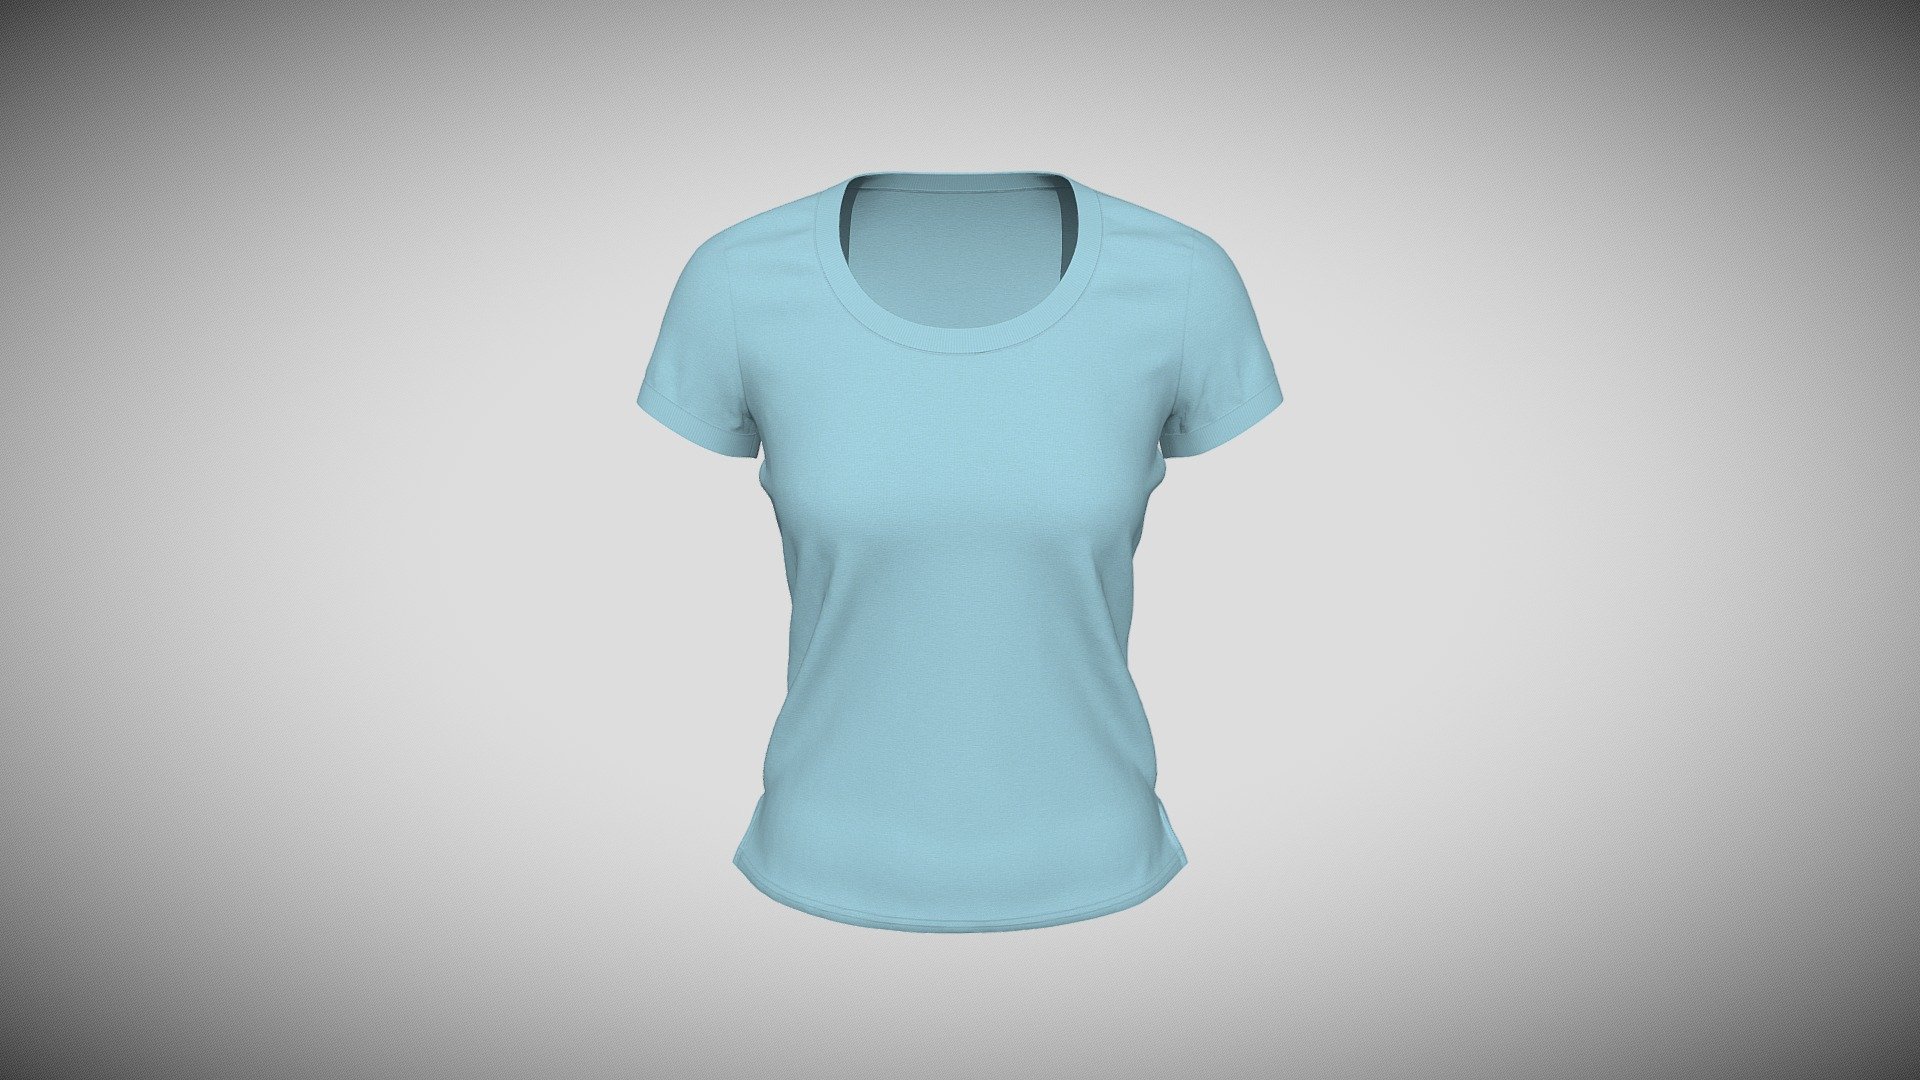 Cloth Title = Relaxed Boat Neck Tee 

SKU = DG100030 

Category = Women 

Product Type = Tee 

Cloth Length = Regular 

Body Fit = Regular Fit 

Occasion = Casual  

Sleeve Style = Set In Sleeve  


Our Services:

3D Apparel Design.

OBJ,FBX,GLTF Making with High/Low Poly.

Fabric Digitalization.

Mockup making.

3D Teck Pack.

Pattern Making.

2D Illustration.

Cloth Animation and 360 Spin Video.


Contact us:- 

Email: info@digitalfashionwear.com 

Website: https://digitalfashionwear.com 

WhatsApp No: +8801759350445 


We designed all the types of cloth specially focused on product visualization, e-commerce, fitting, and production. 

We will design: 

T-shirts 

Polo shirts 

Hoodies 

Sweatshirt 

Jackets 

Shirts 

TankTops 

Trousers 

Bras 

Underwear 

Blazer 

Aprons 

Leggings 

and All Fashion items. 





Our goal is to make sure what we provide you, meets your demand 3d model